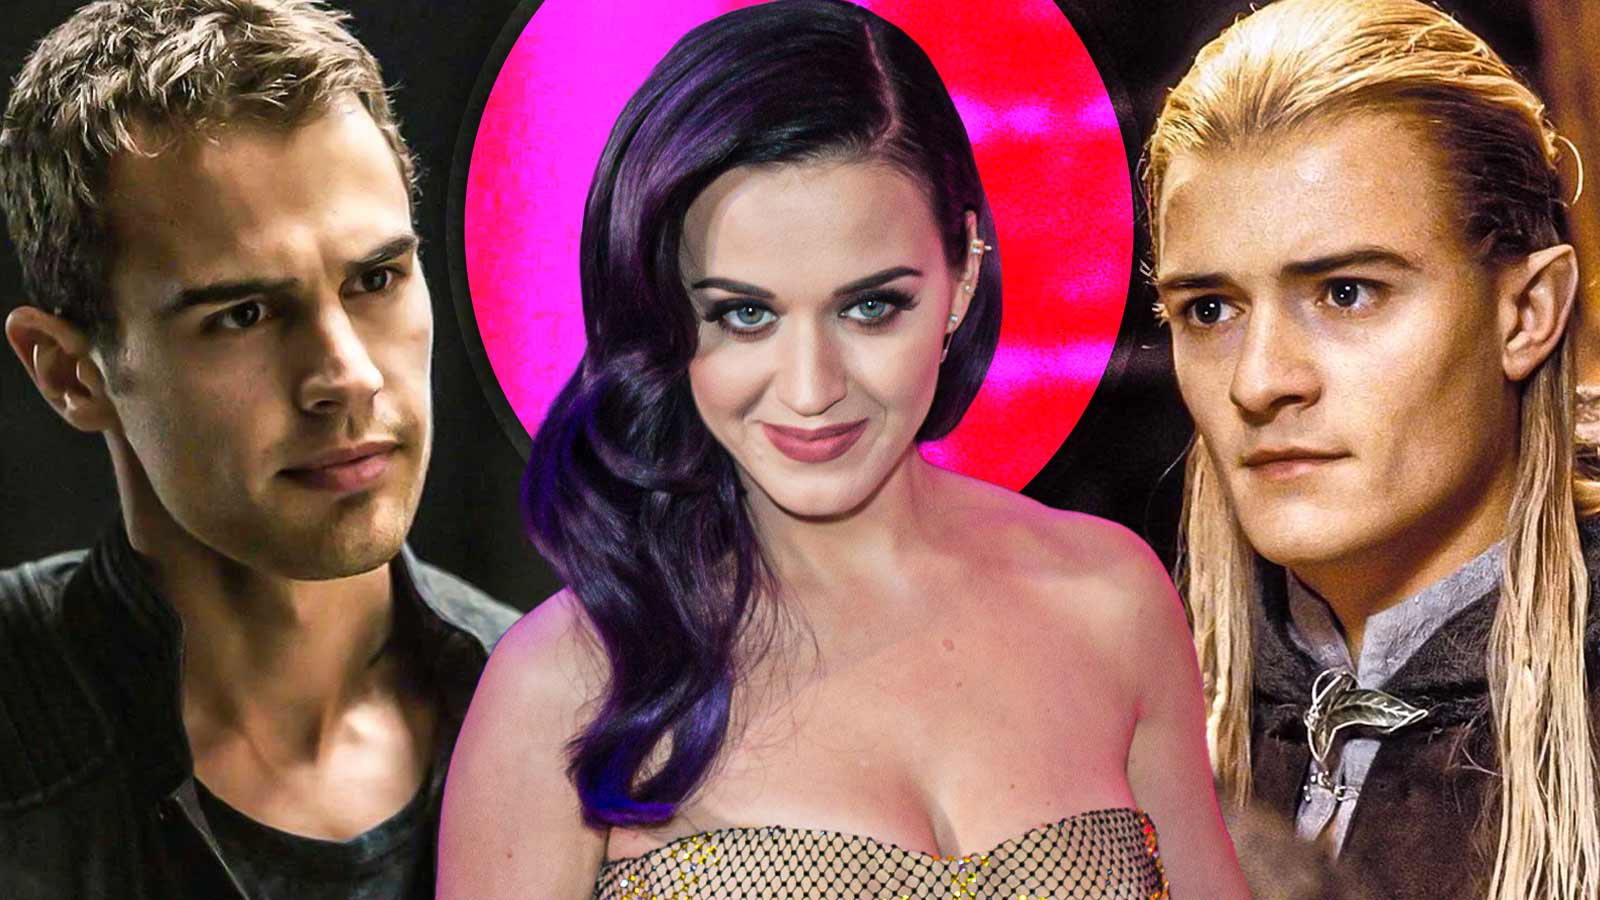 “The inspiration being Theo James”: Katy Perry Taking a Page From Theo James’ Playbook For Her Steamy Kiss in New Music Video is Orlando Bloom’s Worst Nightmare